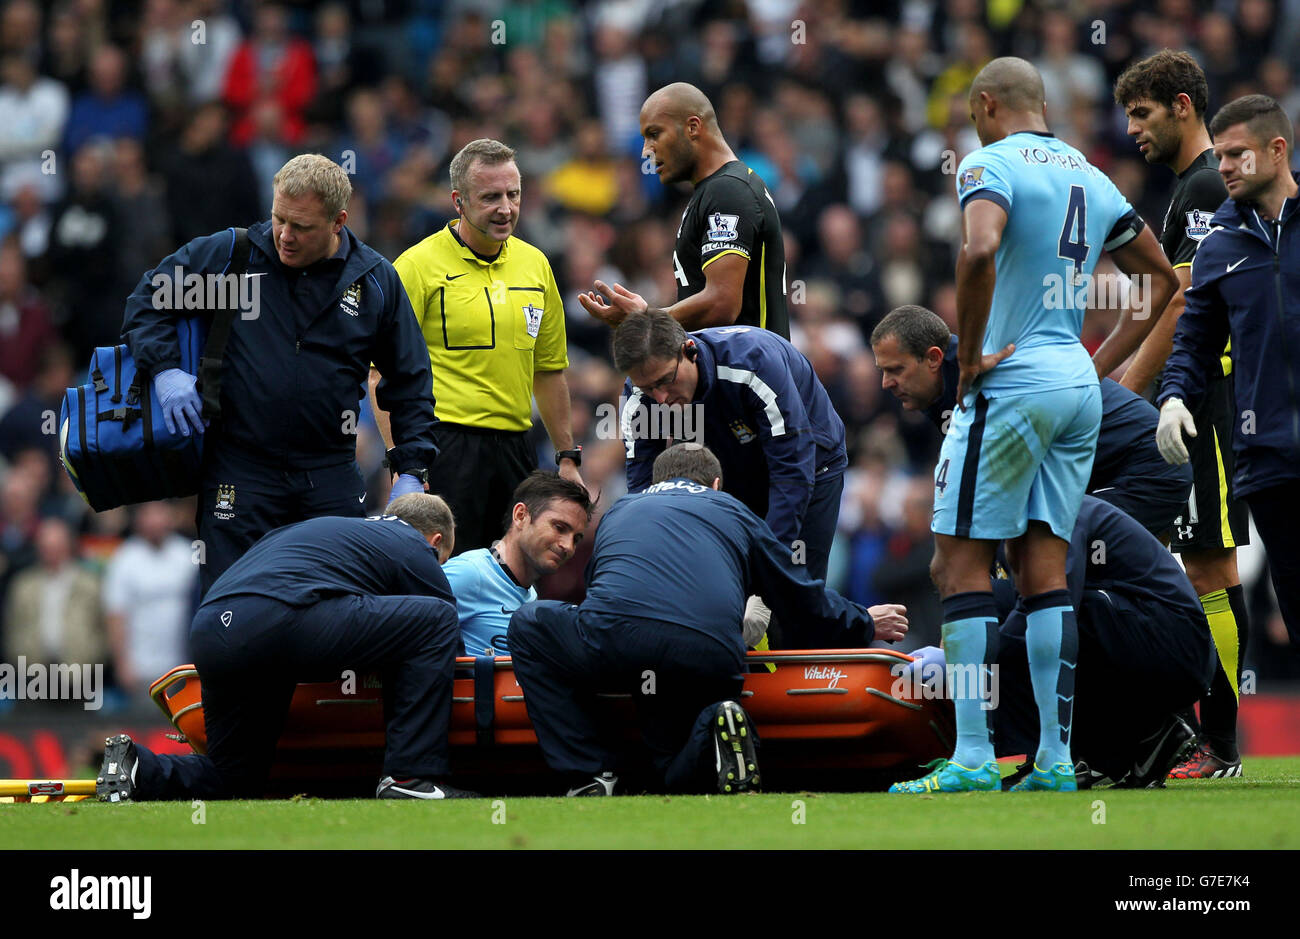 Manchester City's Frank Lampard receives treatment during the Barclays Premier League match at the Etihad Stadium, Manchester. Stock Photo